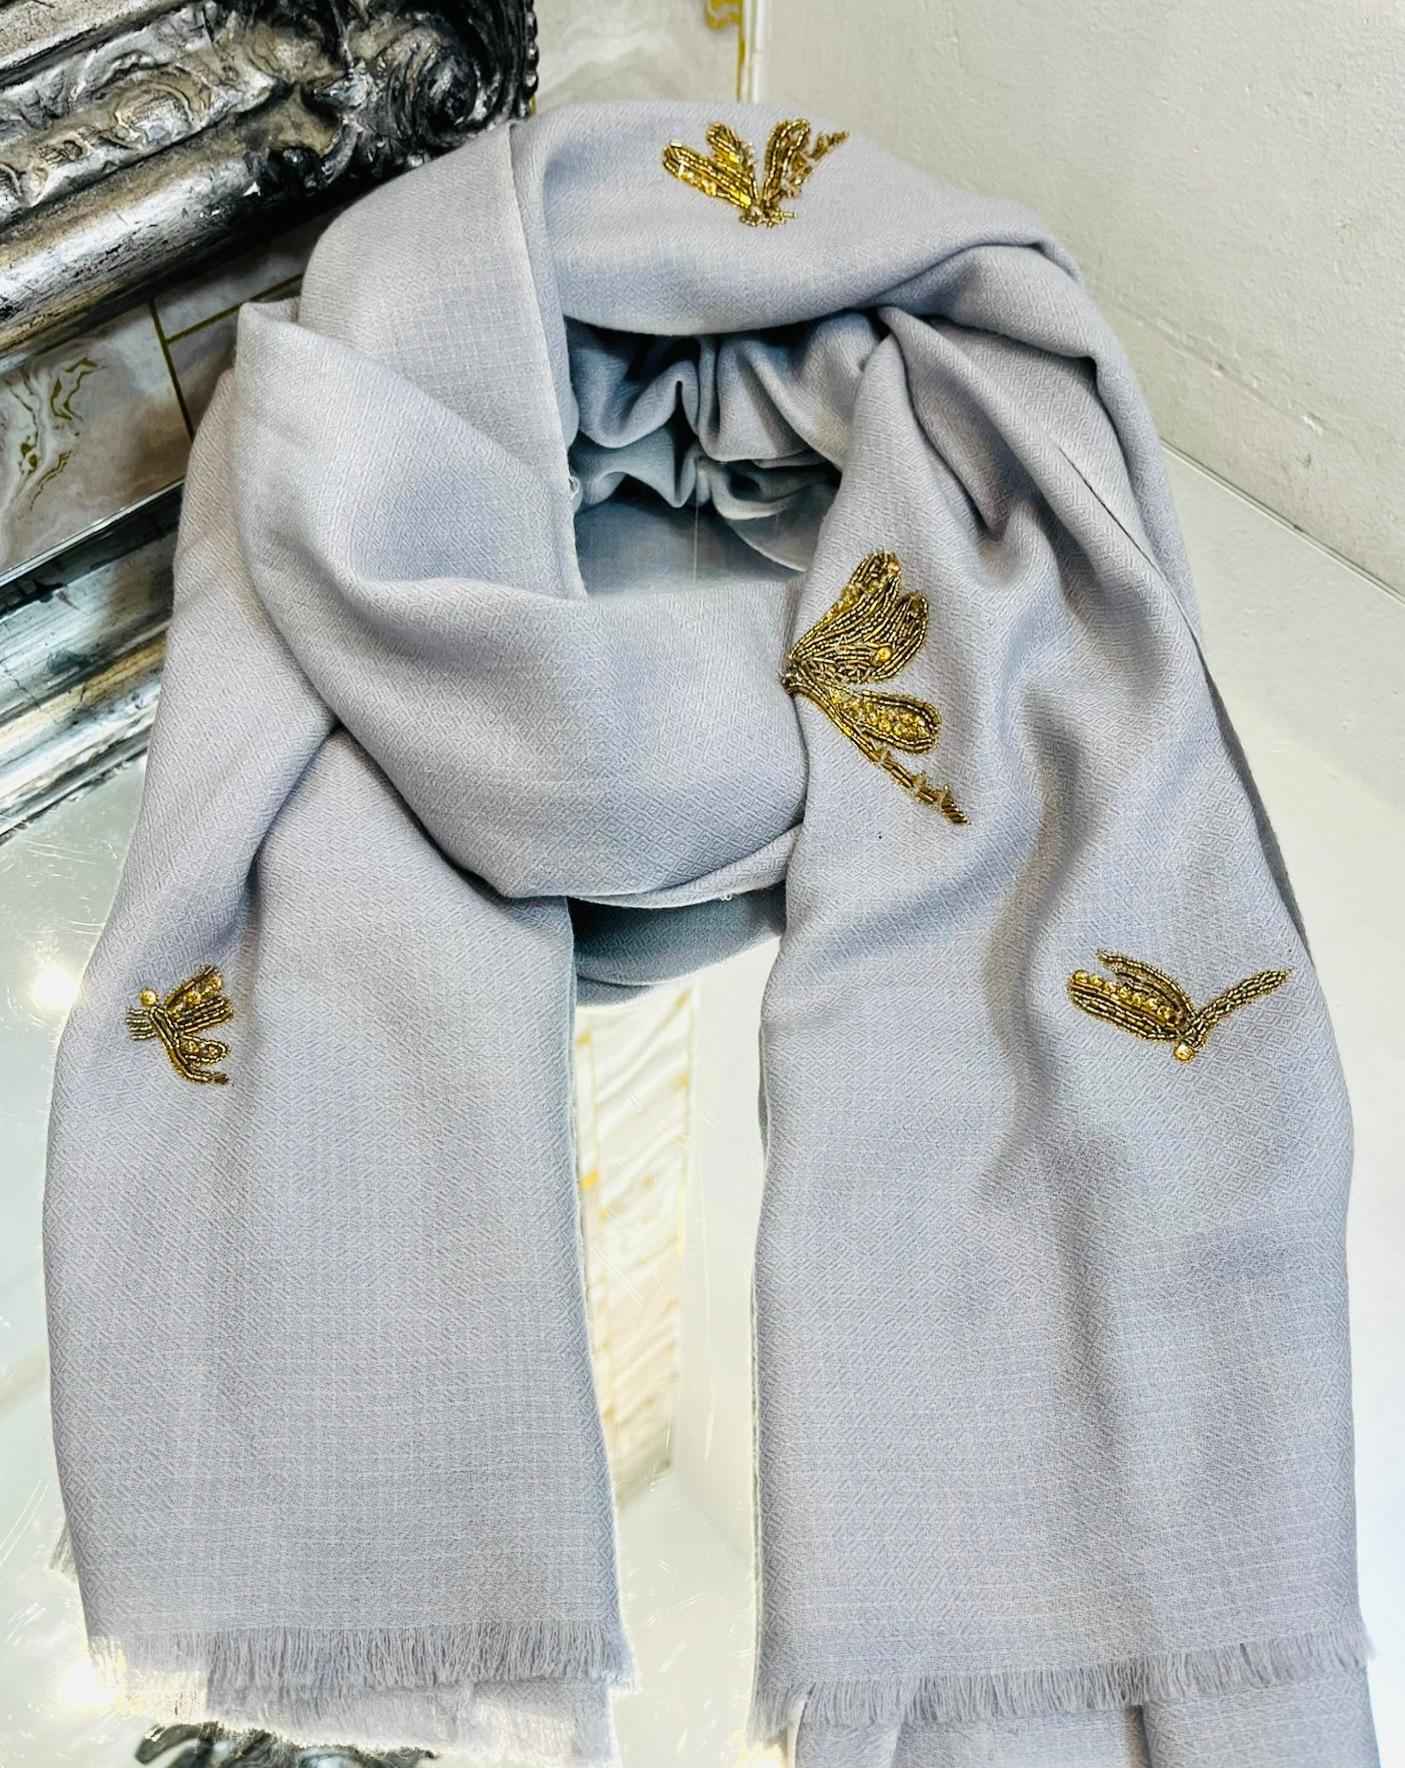 Janavi Beaded Dragonfly Merino Wool Scarf

Grey, handcrafted scarf designed with gold and brown beaded dragonfly motifs throughout.

Featuring fringed trims and soft-brushed texture.

Size – 198cm x 136cm

Condition – Good (General signs of